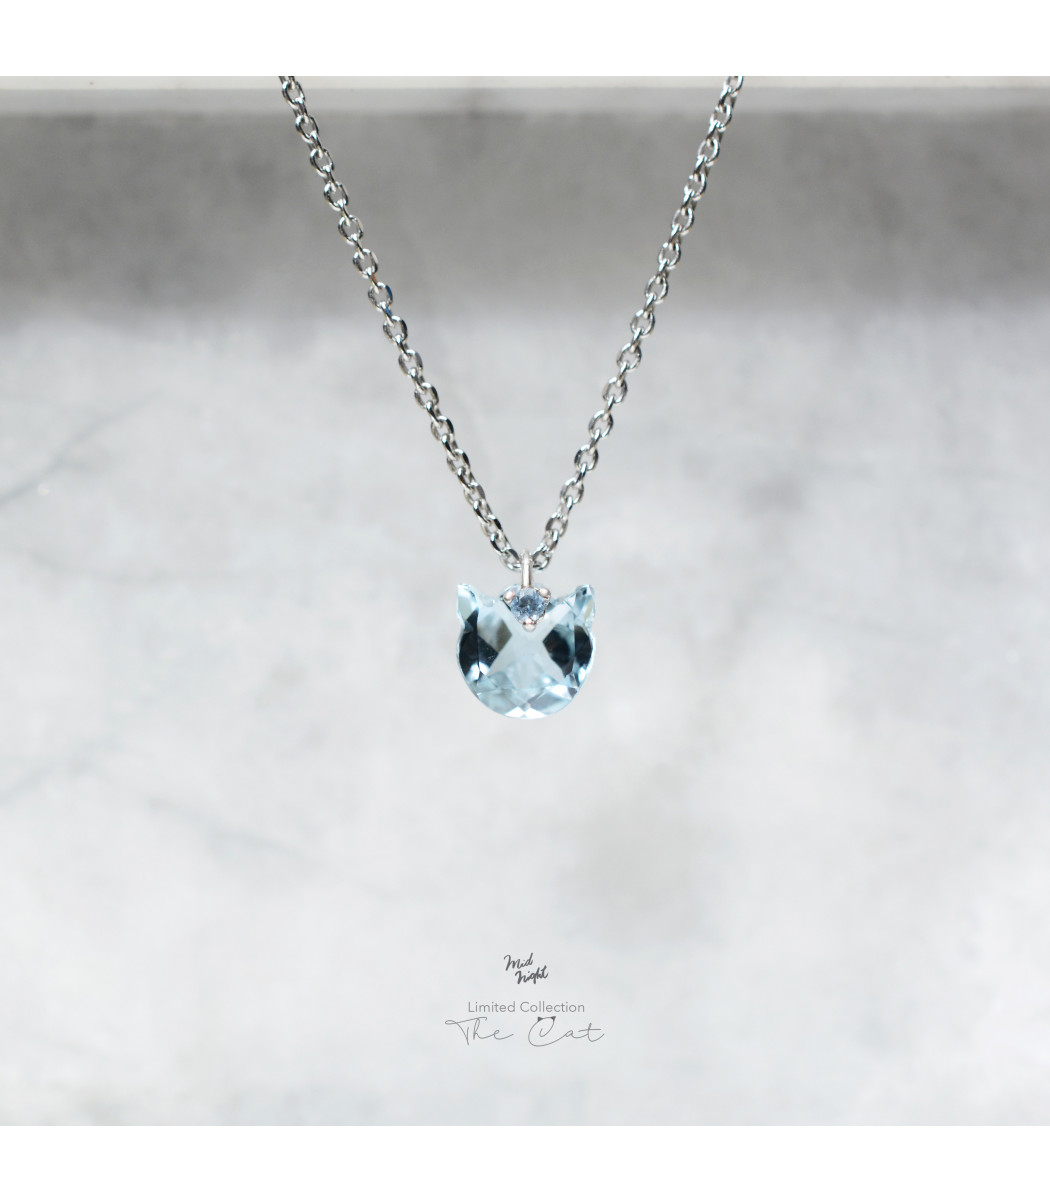 Limited Collection-The Cat Topaz Necklace